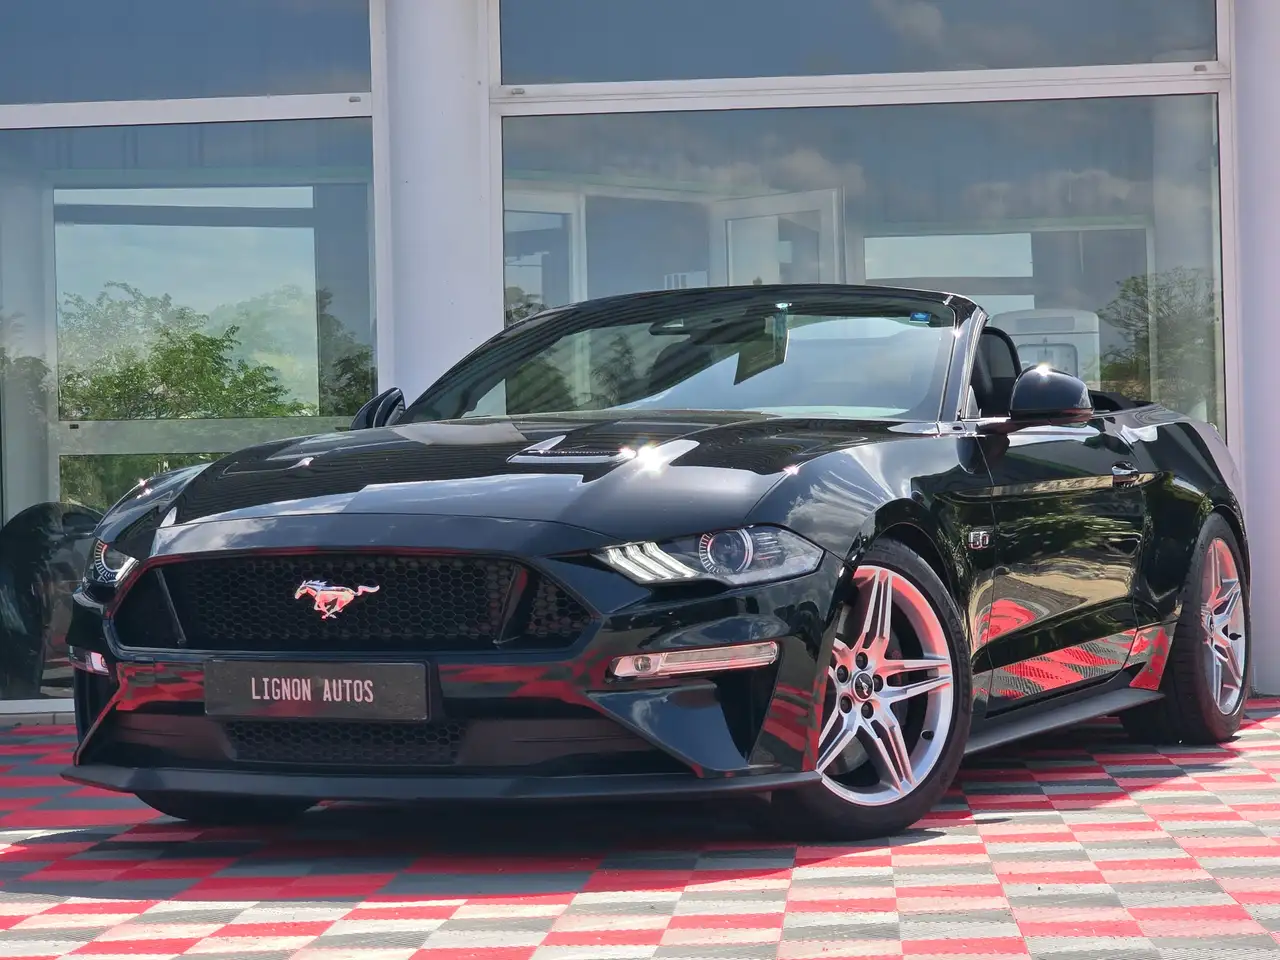 2019 - Ford Mustang Mustang Boîte automatique Cabriolet